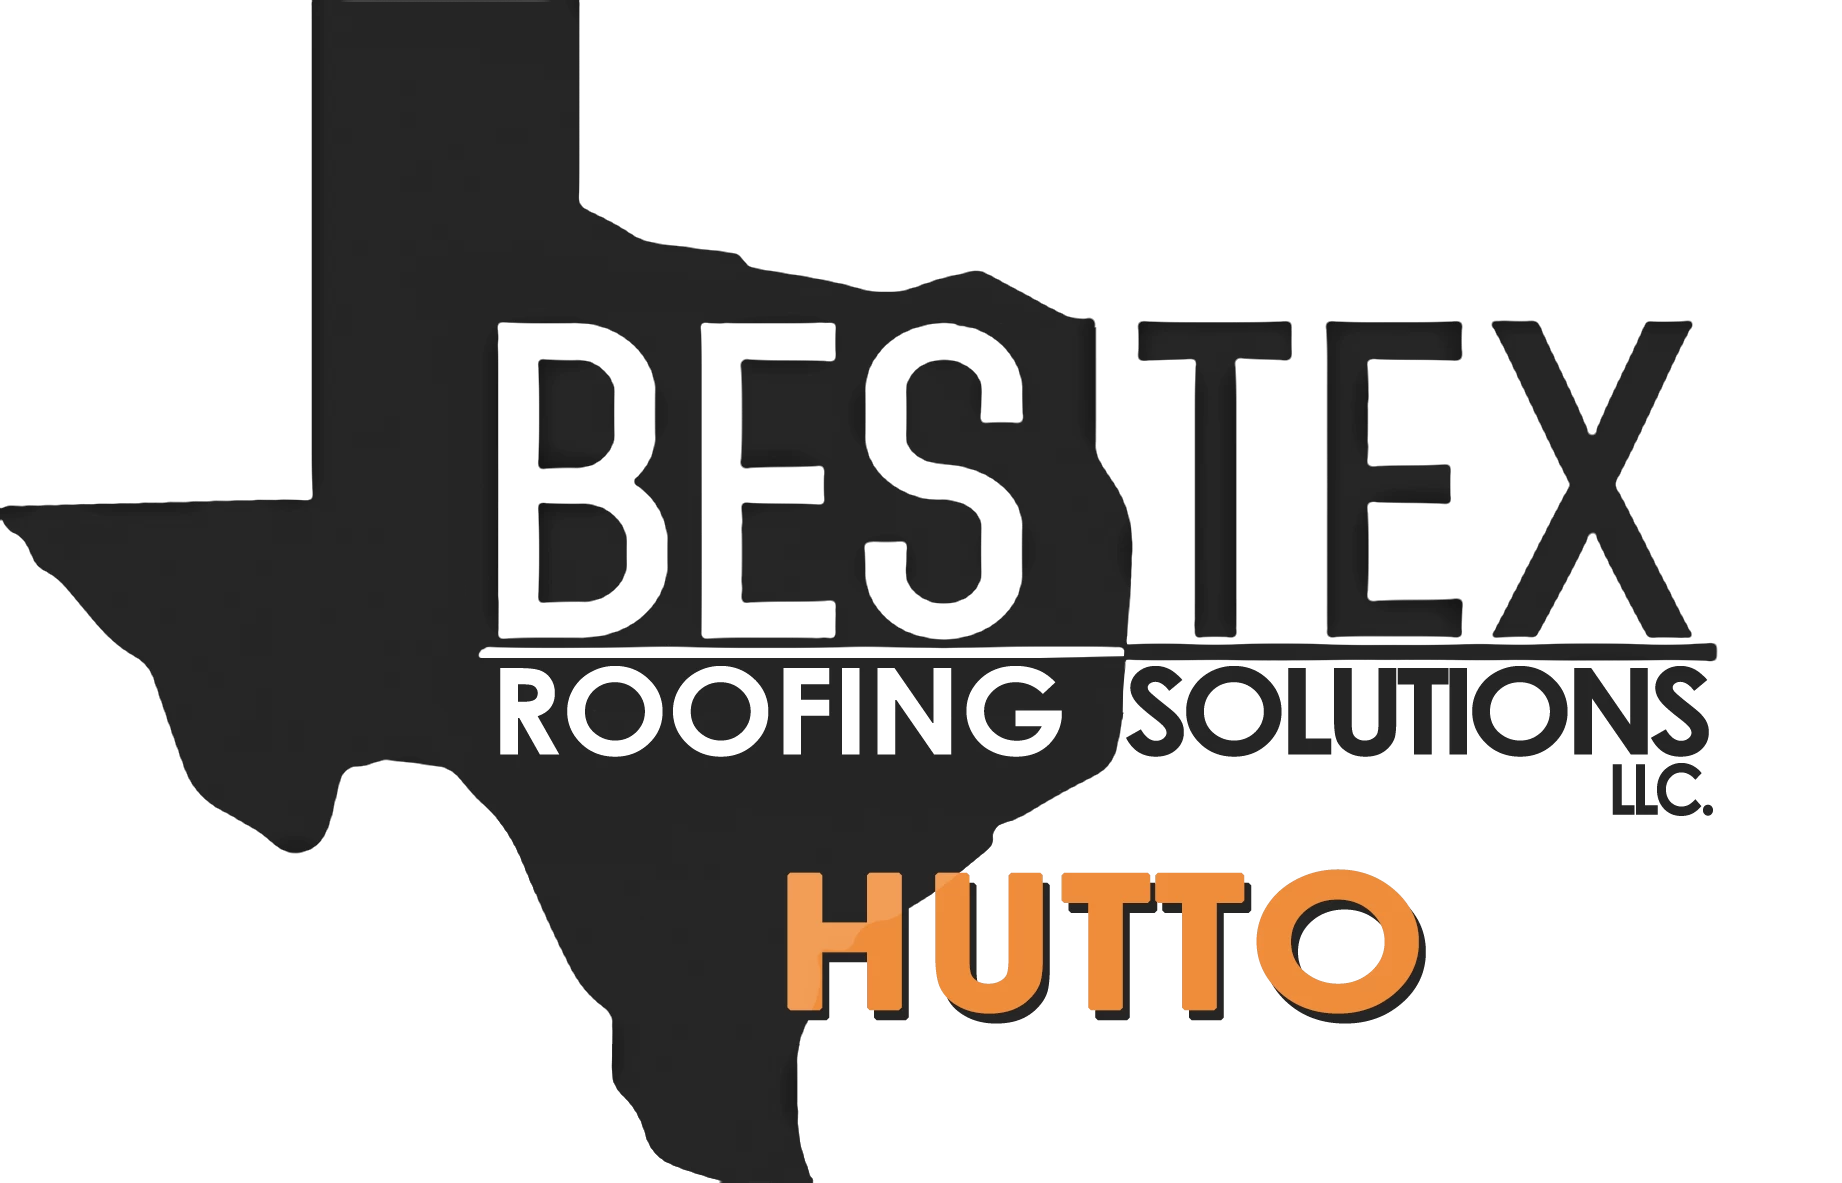 Logo Hutto Texas Roofing, Restoration & Remodeling